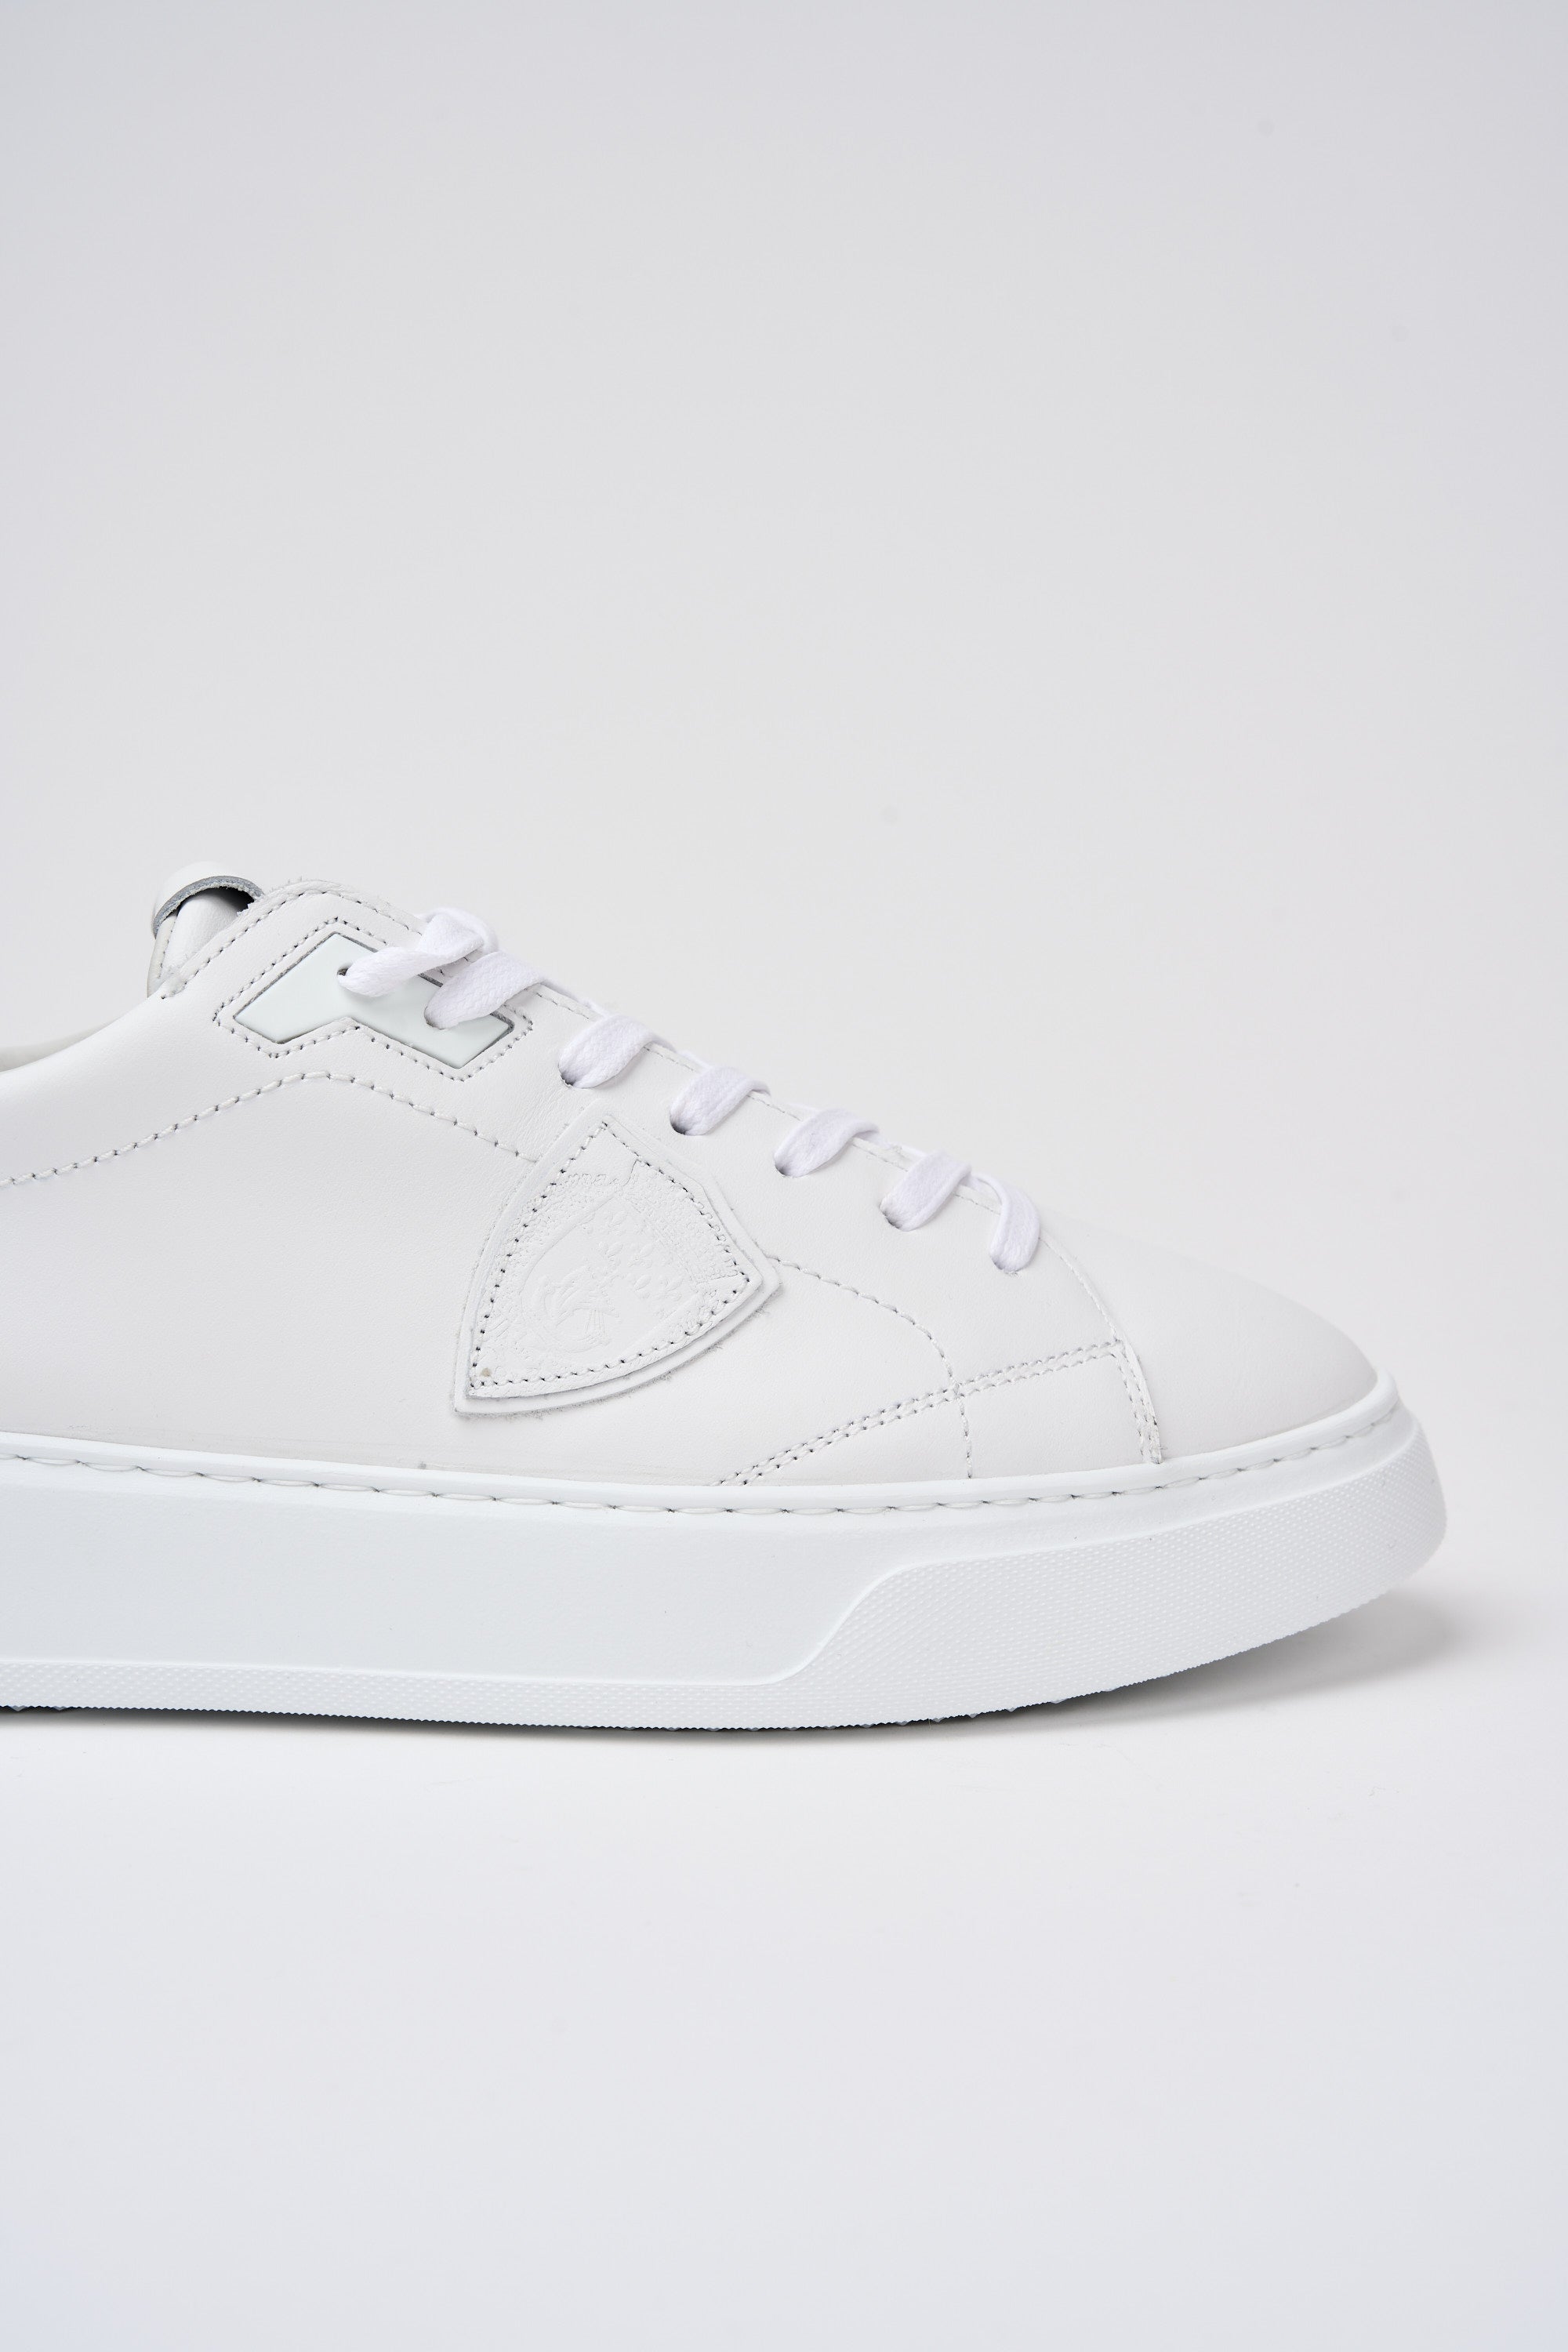 Philippe Model Sneakers Temple Leather White-4